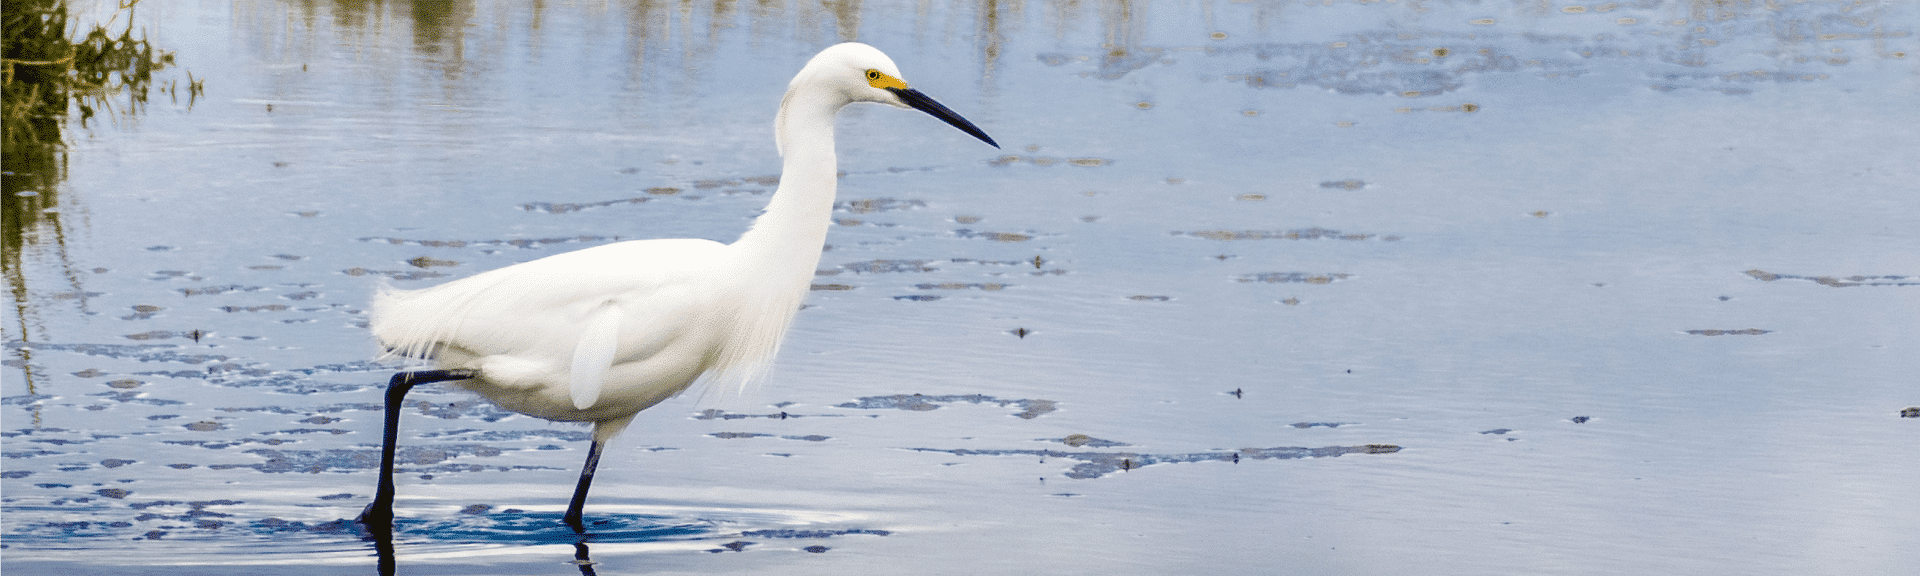 About Watershed Watch White Egret